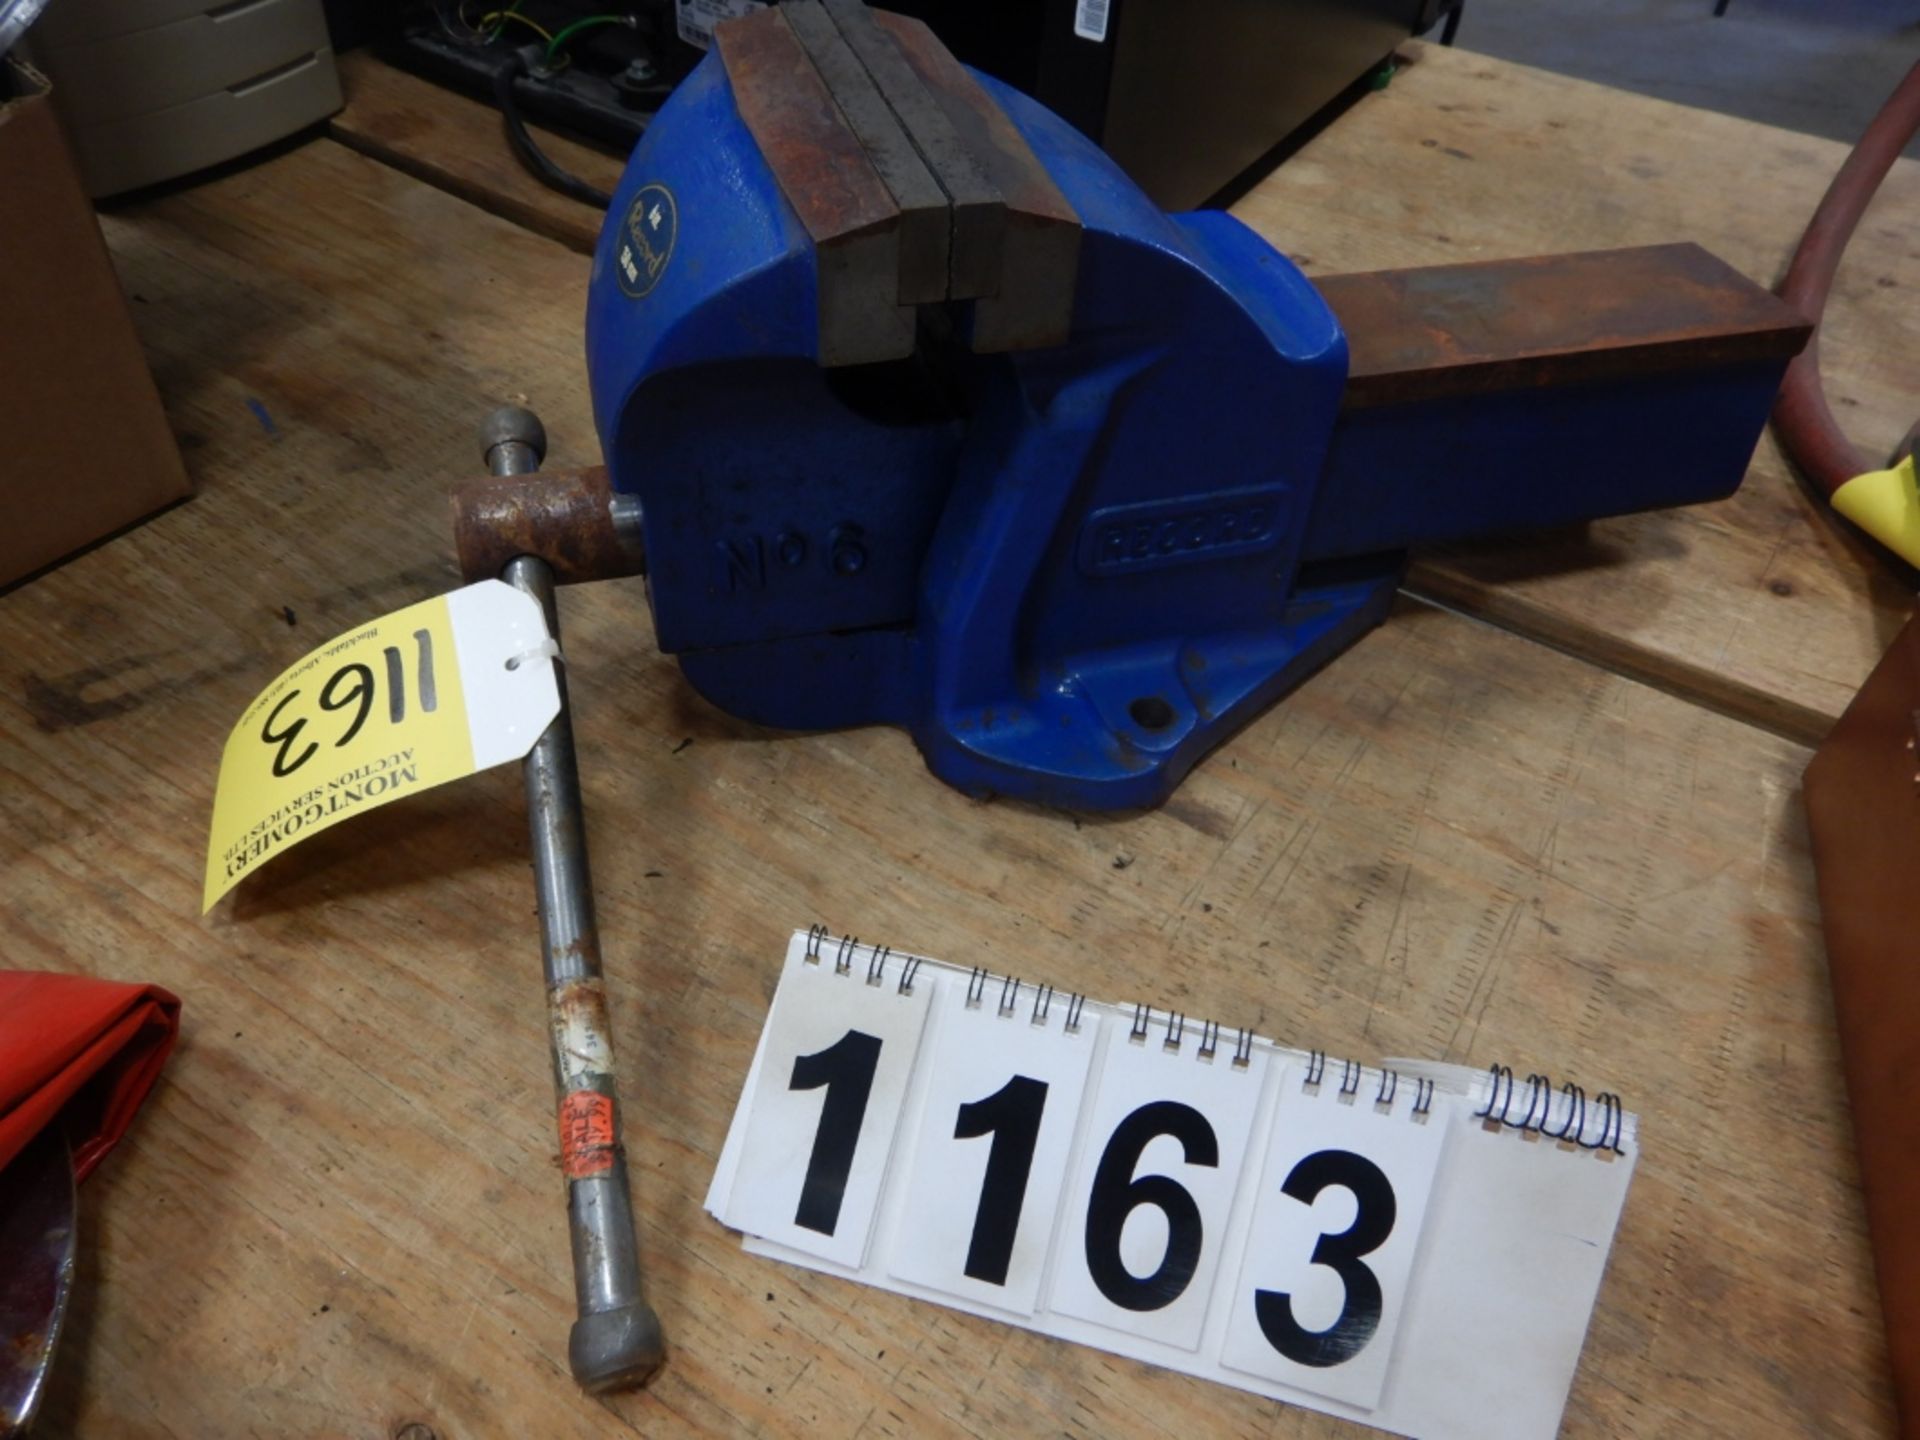 6"" RECORD BENCH VISE